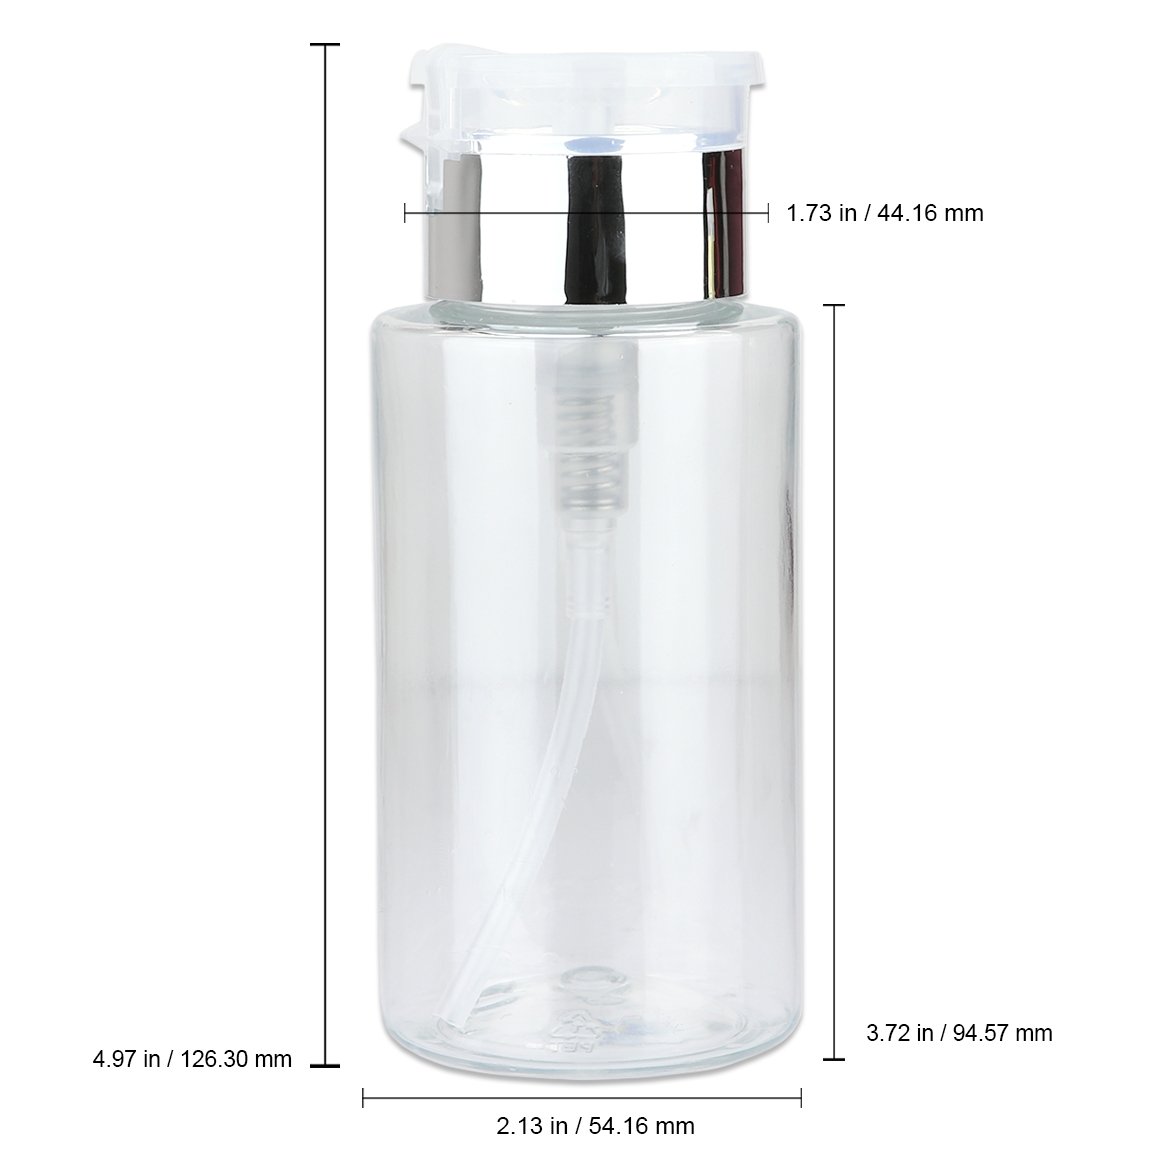 Pana 7oz. Professional Push Down Liquid Pumping Clear Bottle Dispenser (Silver Lid with No Wording, 2pc)